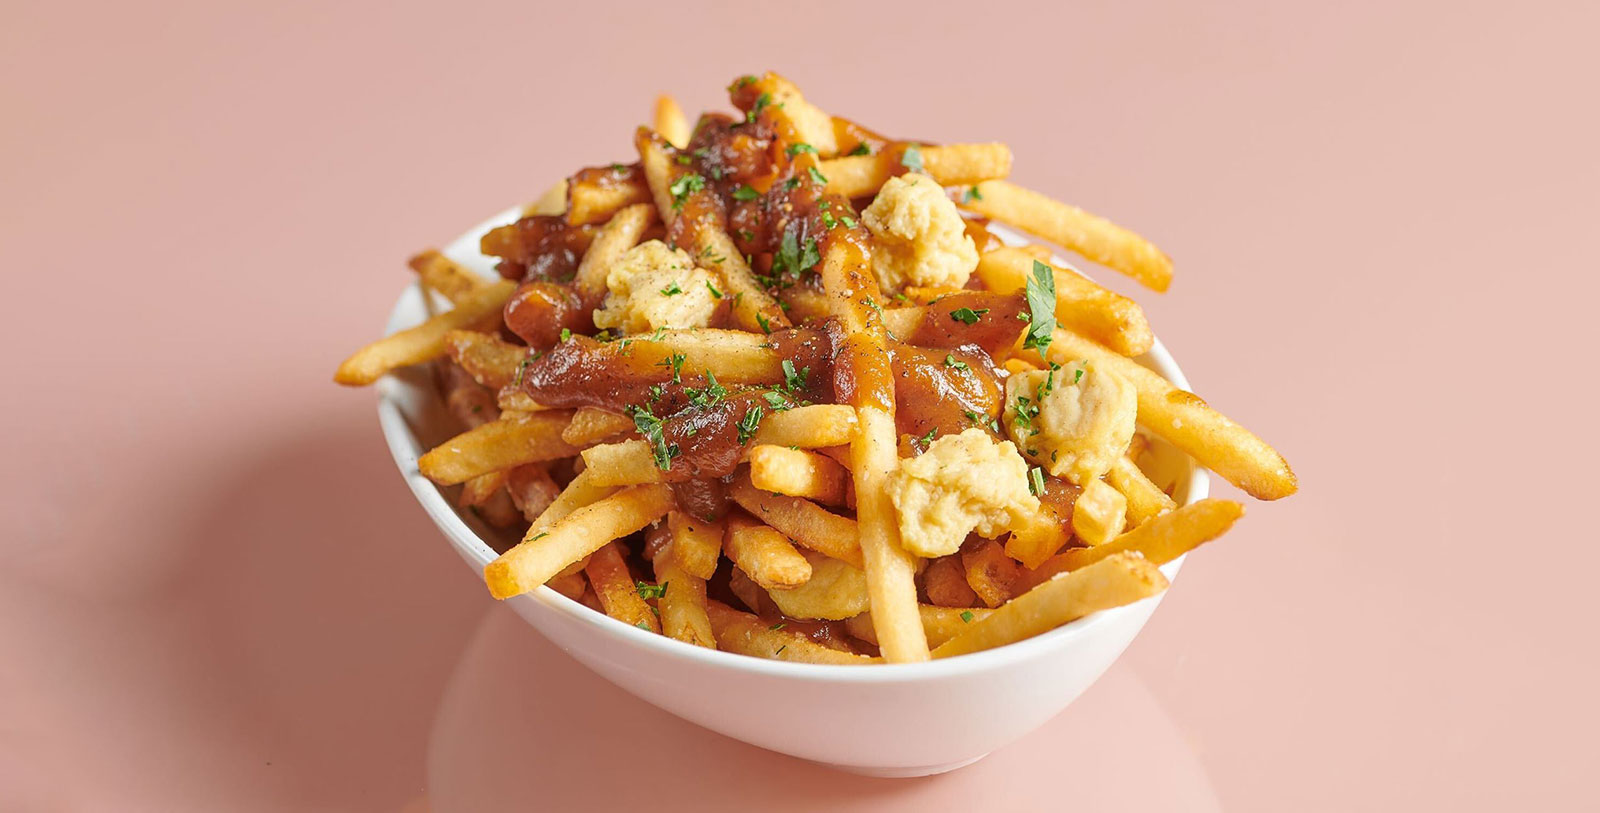 Image of Belmont Poutine served at The Living Room, Hotel Belmont Vancouver MGallery, 1911, a Member of Historic Hotels Worldwide in Vancouver, British Columbia, Canada, Taste